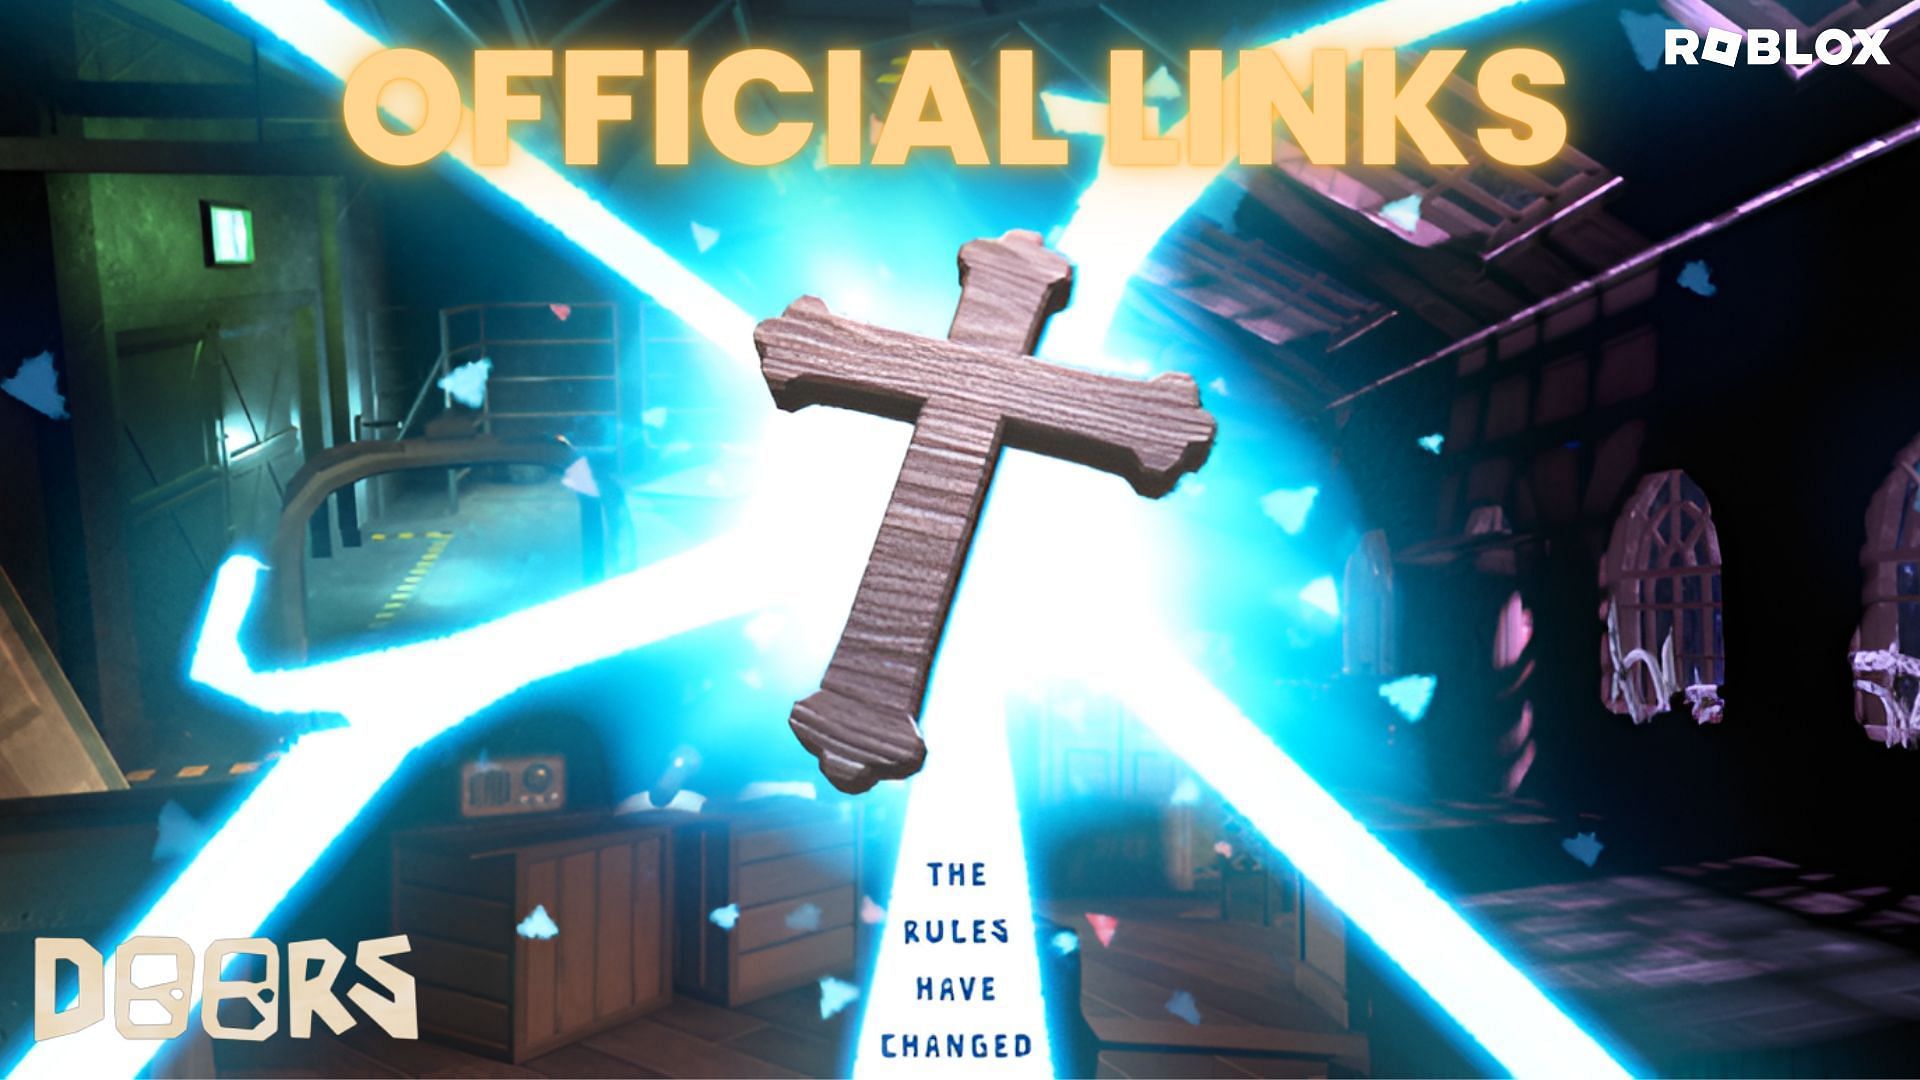 Here are all the official links for Doors (Image via Roblox)